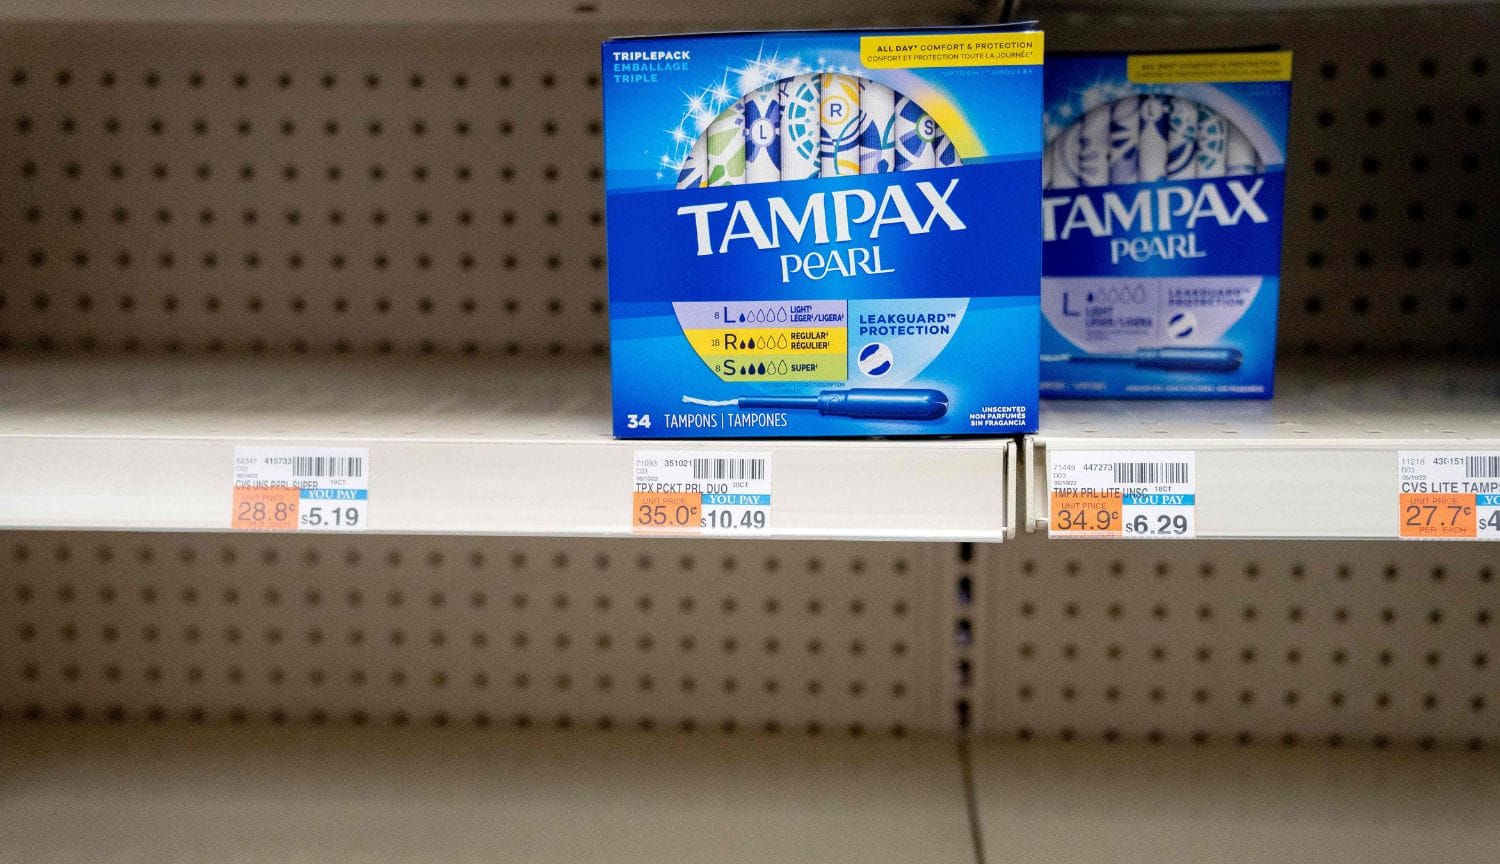 Tampon Shortage Spotlights the Vital Need for Menstrual Equity Now